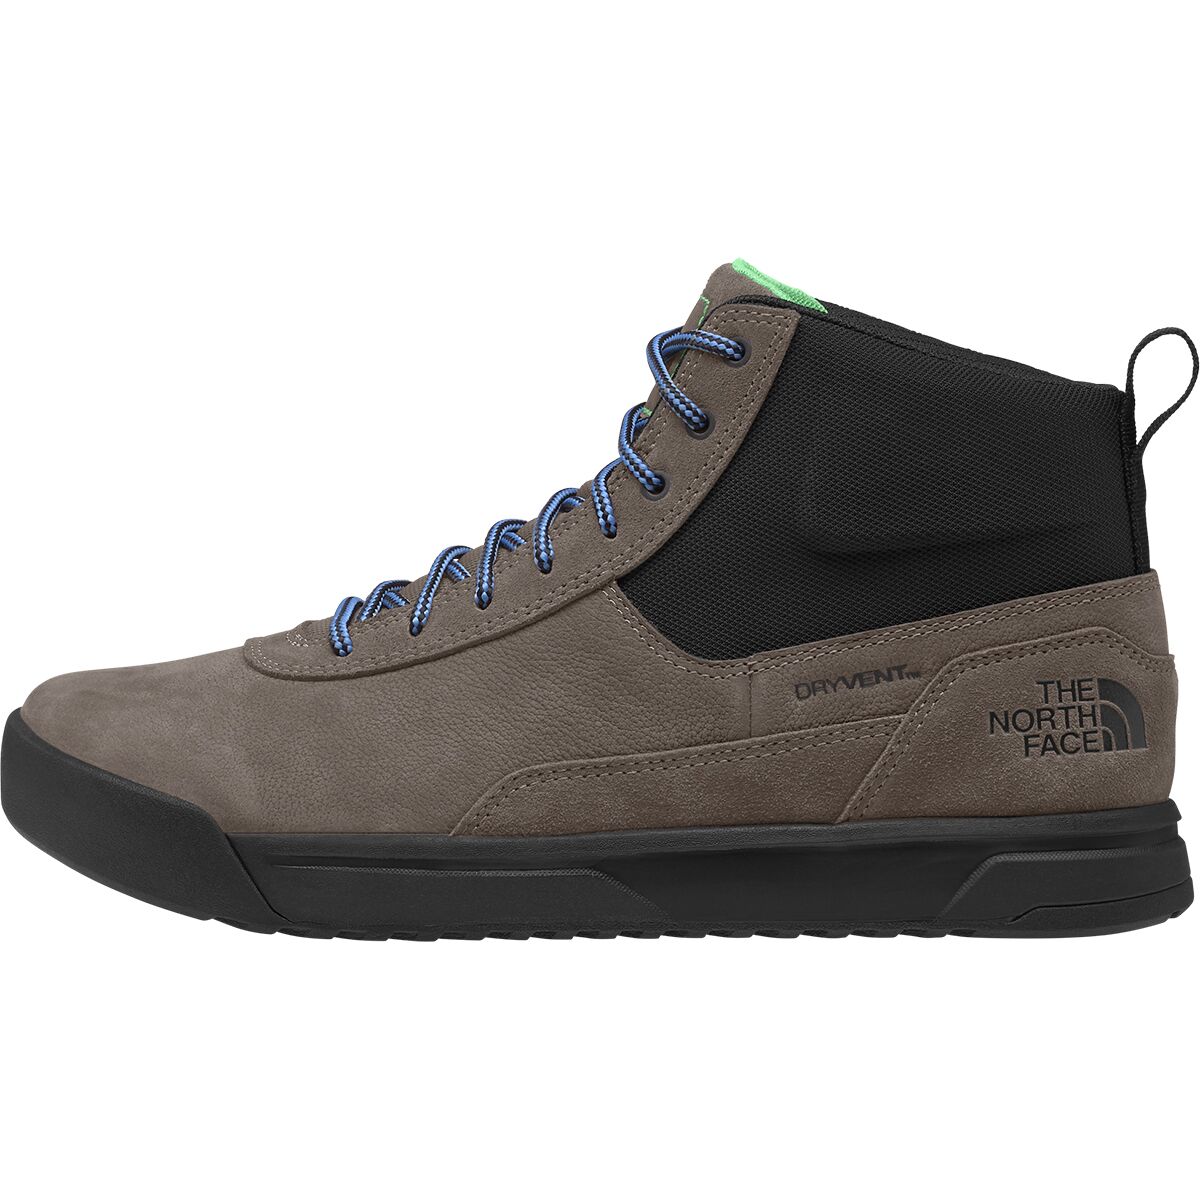 The North Face Larimer Mid Waterproof Boot - Men's